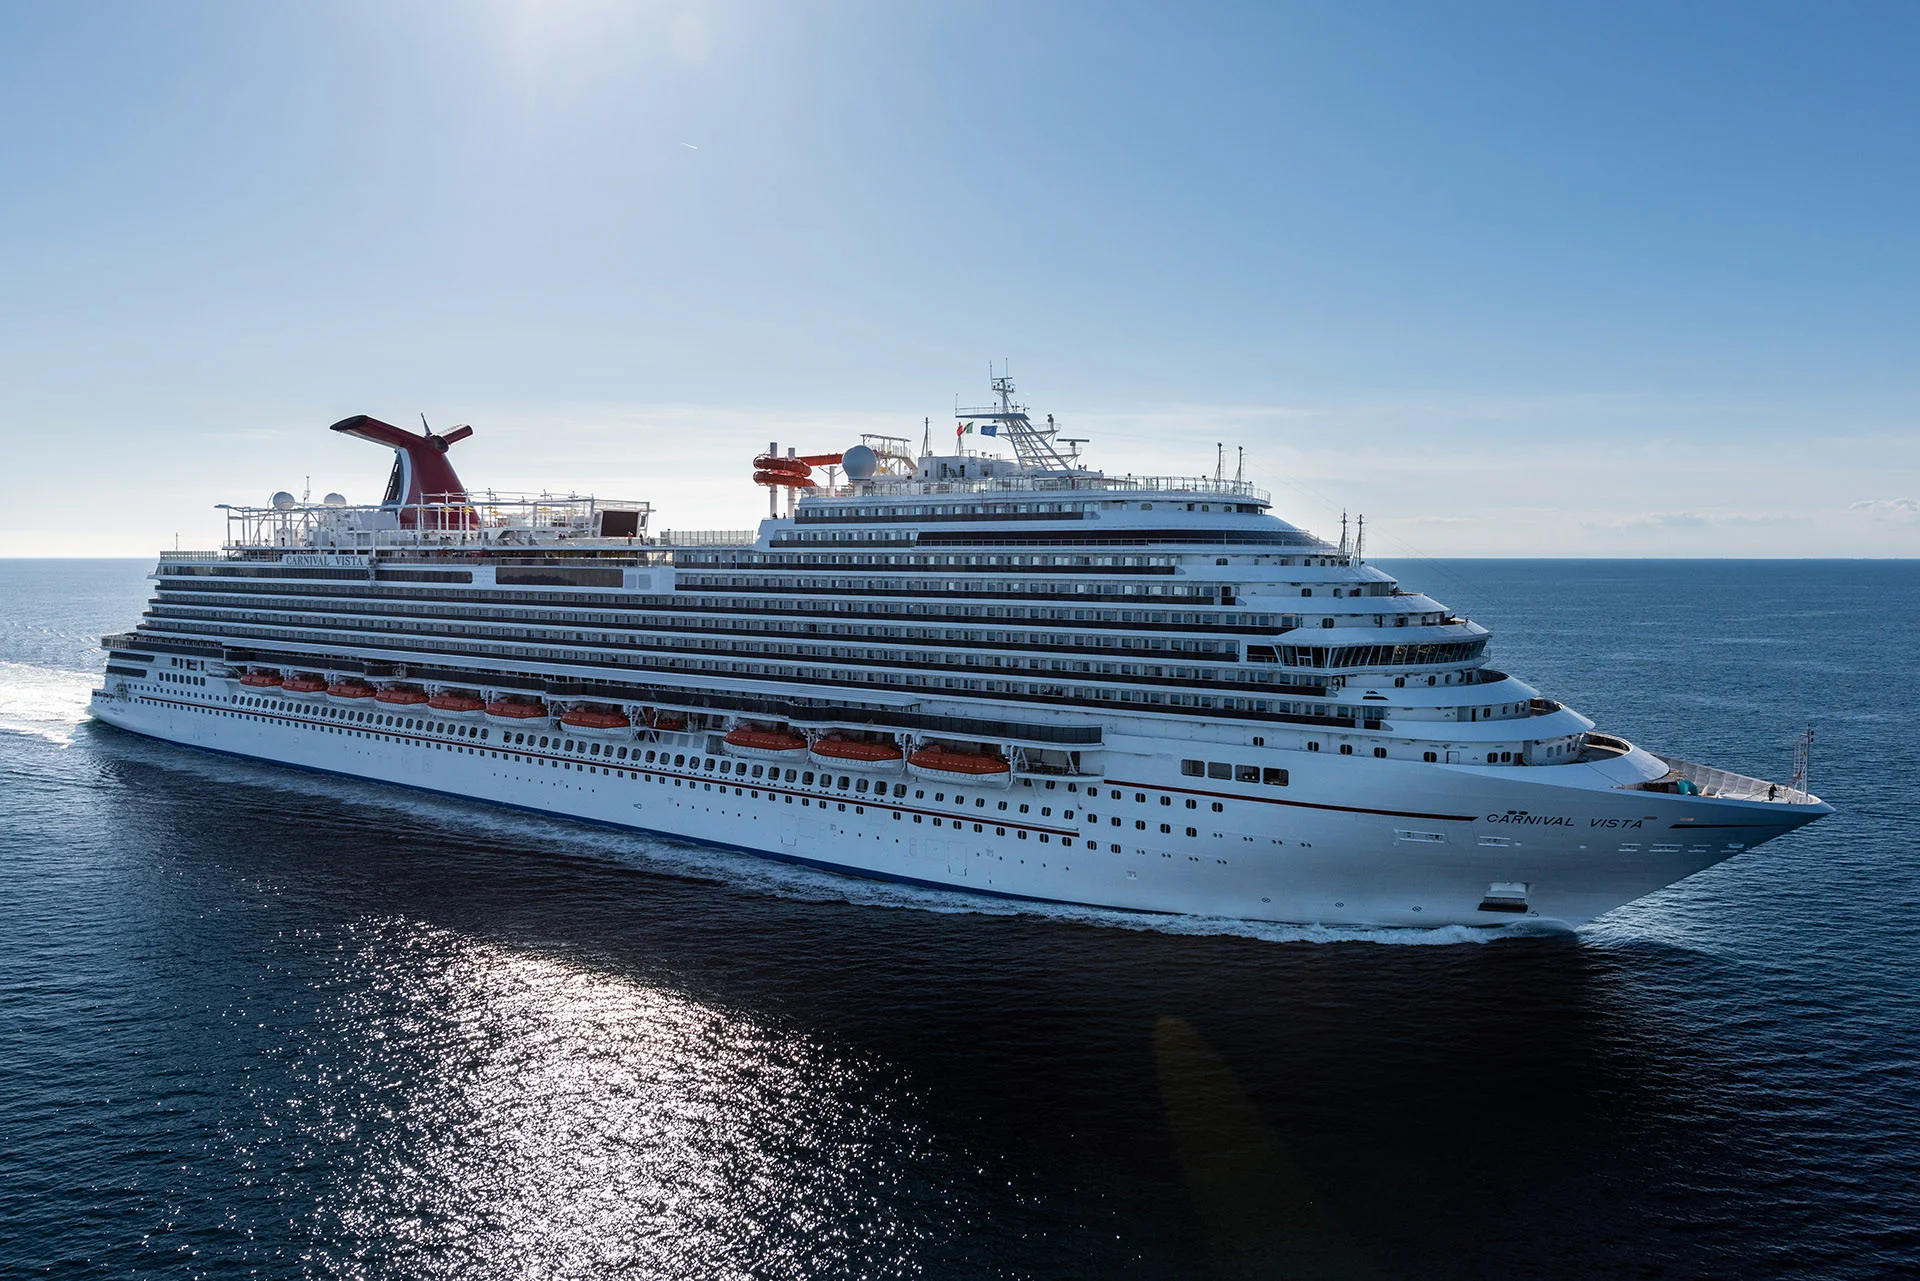 Background Miamibased Carnival Cruise Line announced that its newest and largest ship, Carnival Vista, began six and eightday Emon Reiser is the digital